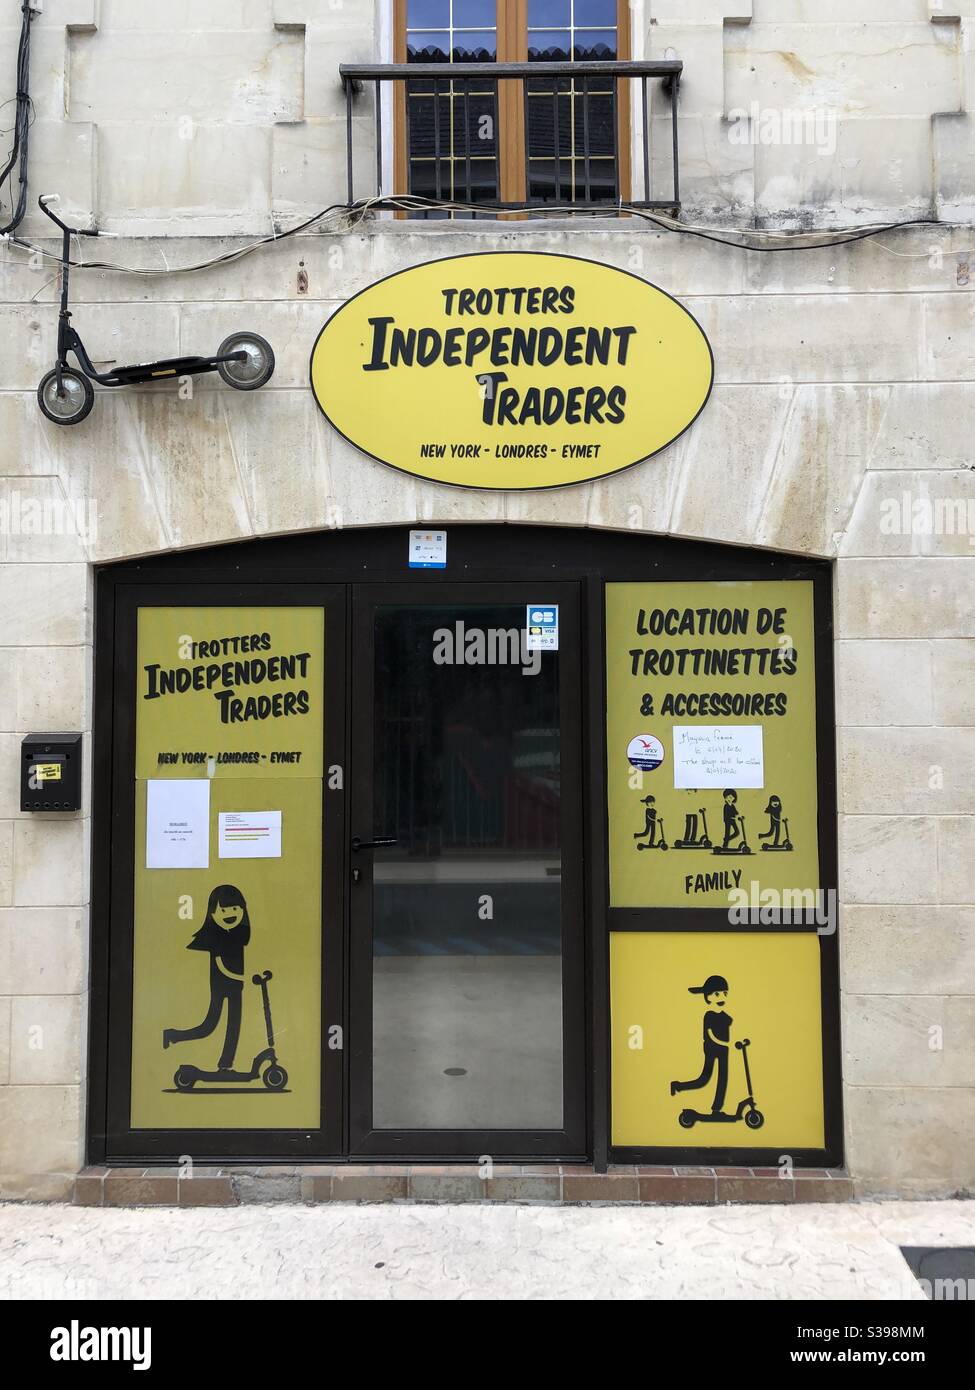 Scooter shop in Eymet, France called Trotters independent traders Stock Photo